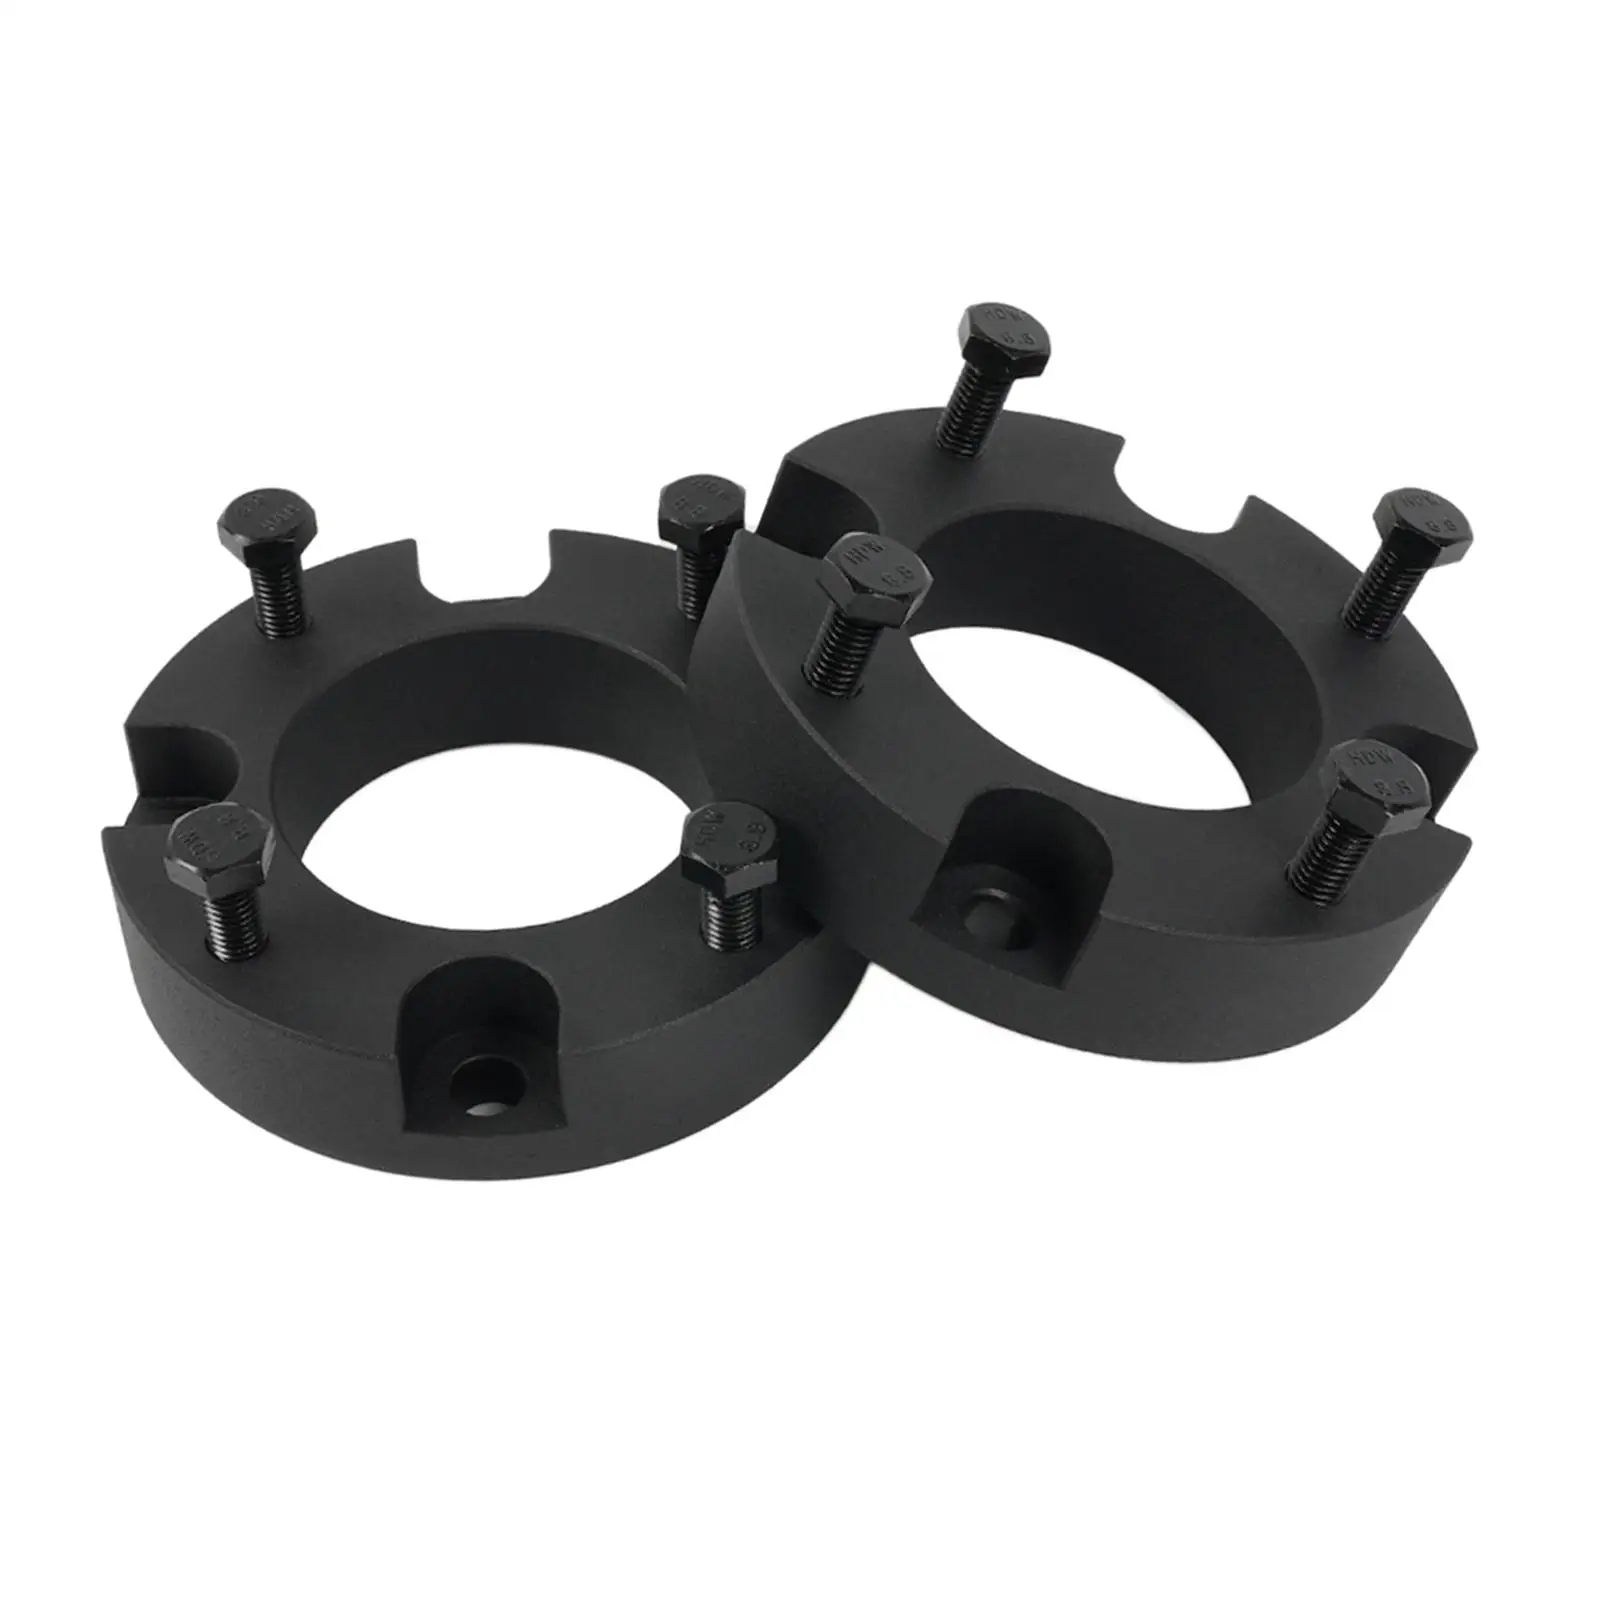 Black Leveling Lift Set Replaces Billet Wheel Spacers for Toyota for tundra